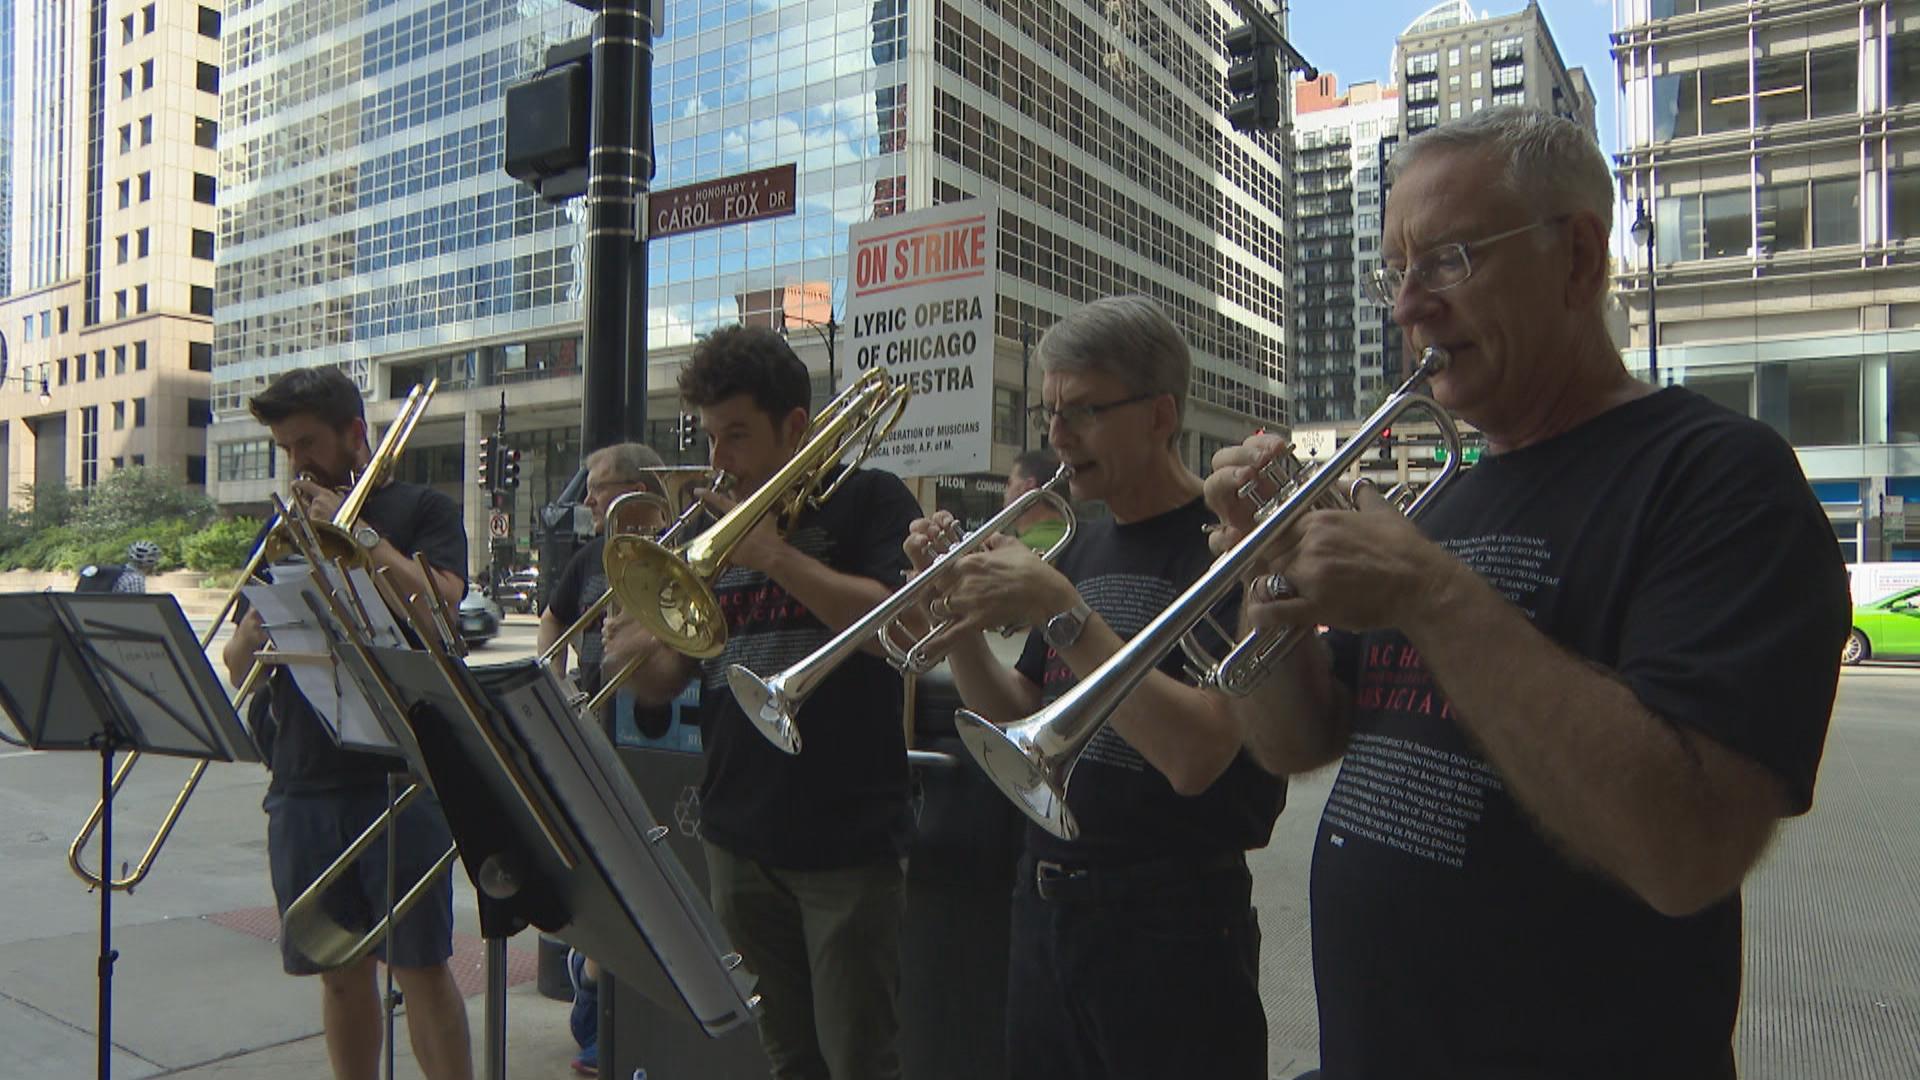 Members of the Chicago Lyric Opera Orchestra strike on Oct. 9, 2018. (Chicago Tonight)